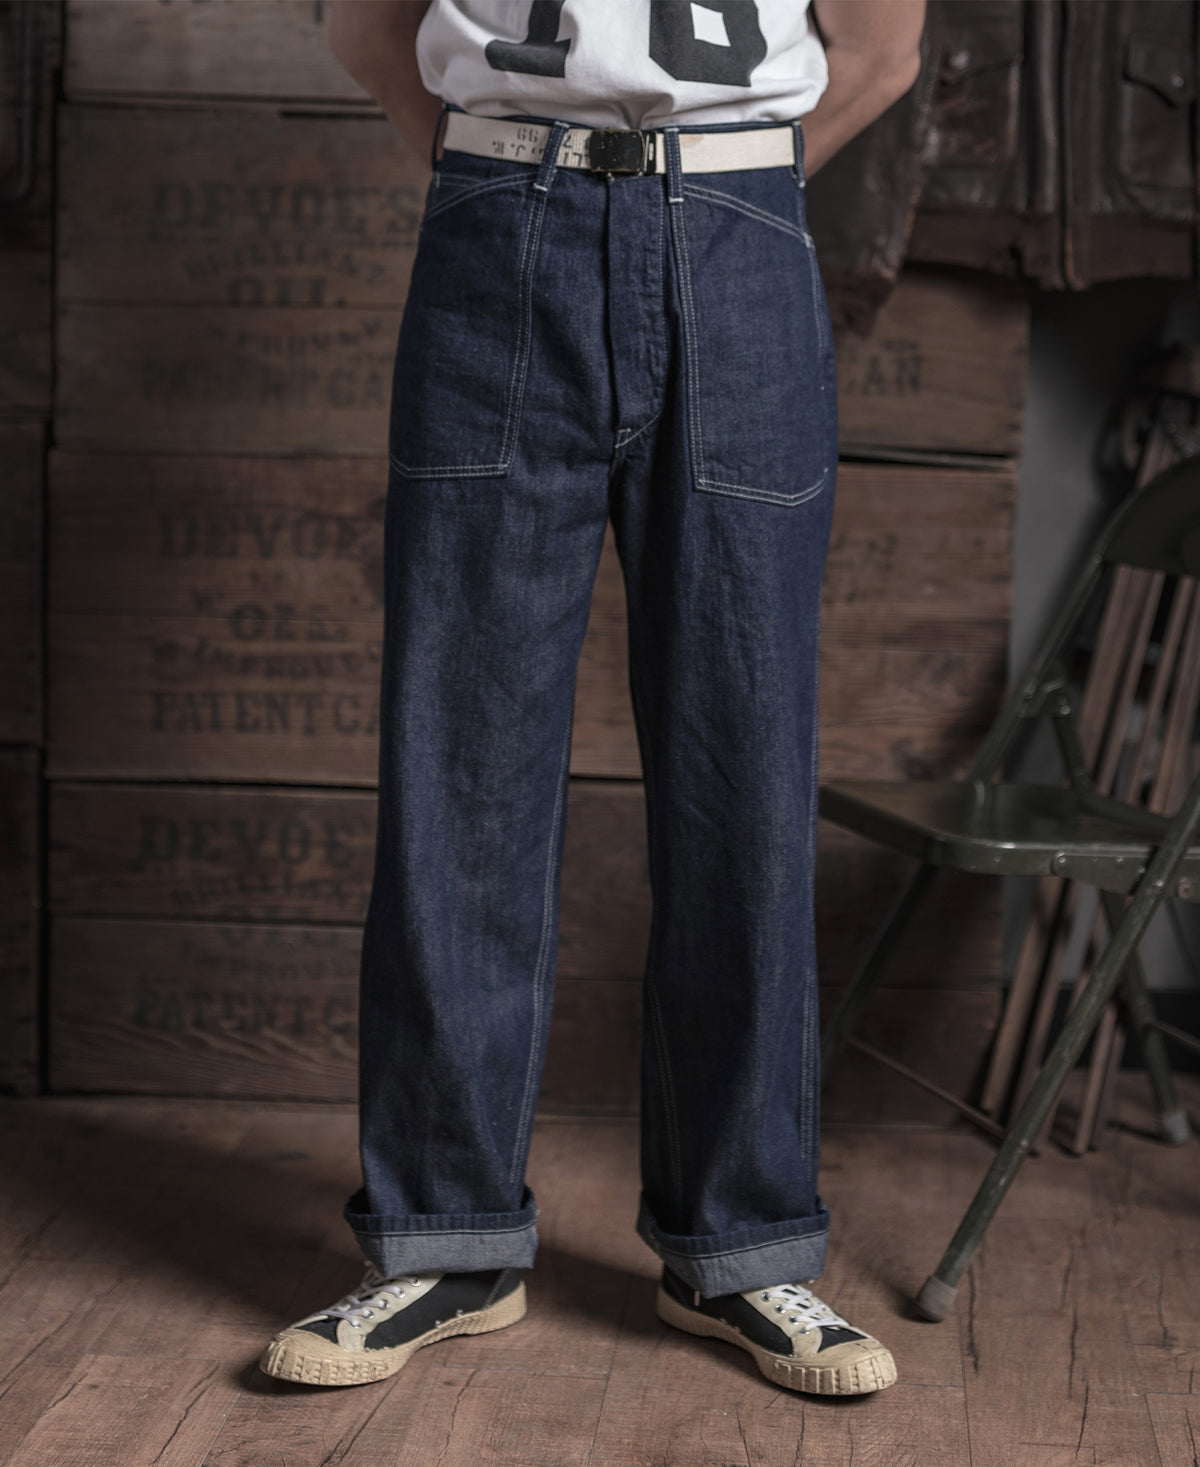 1935 US Army CCC Fatigue Dungaree